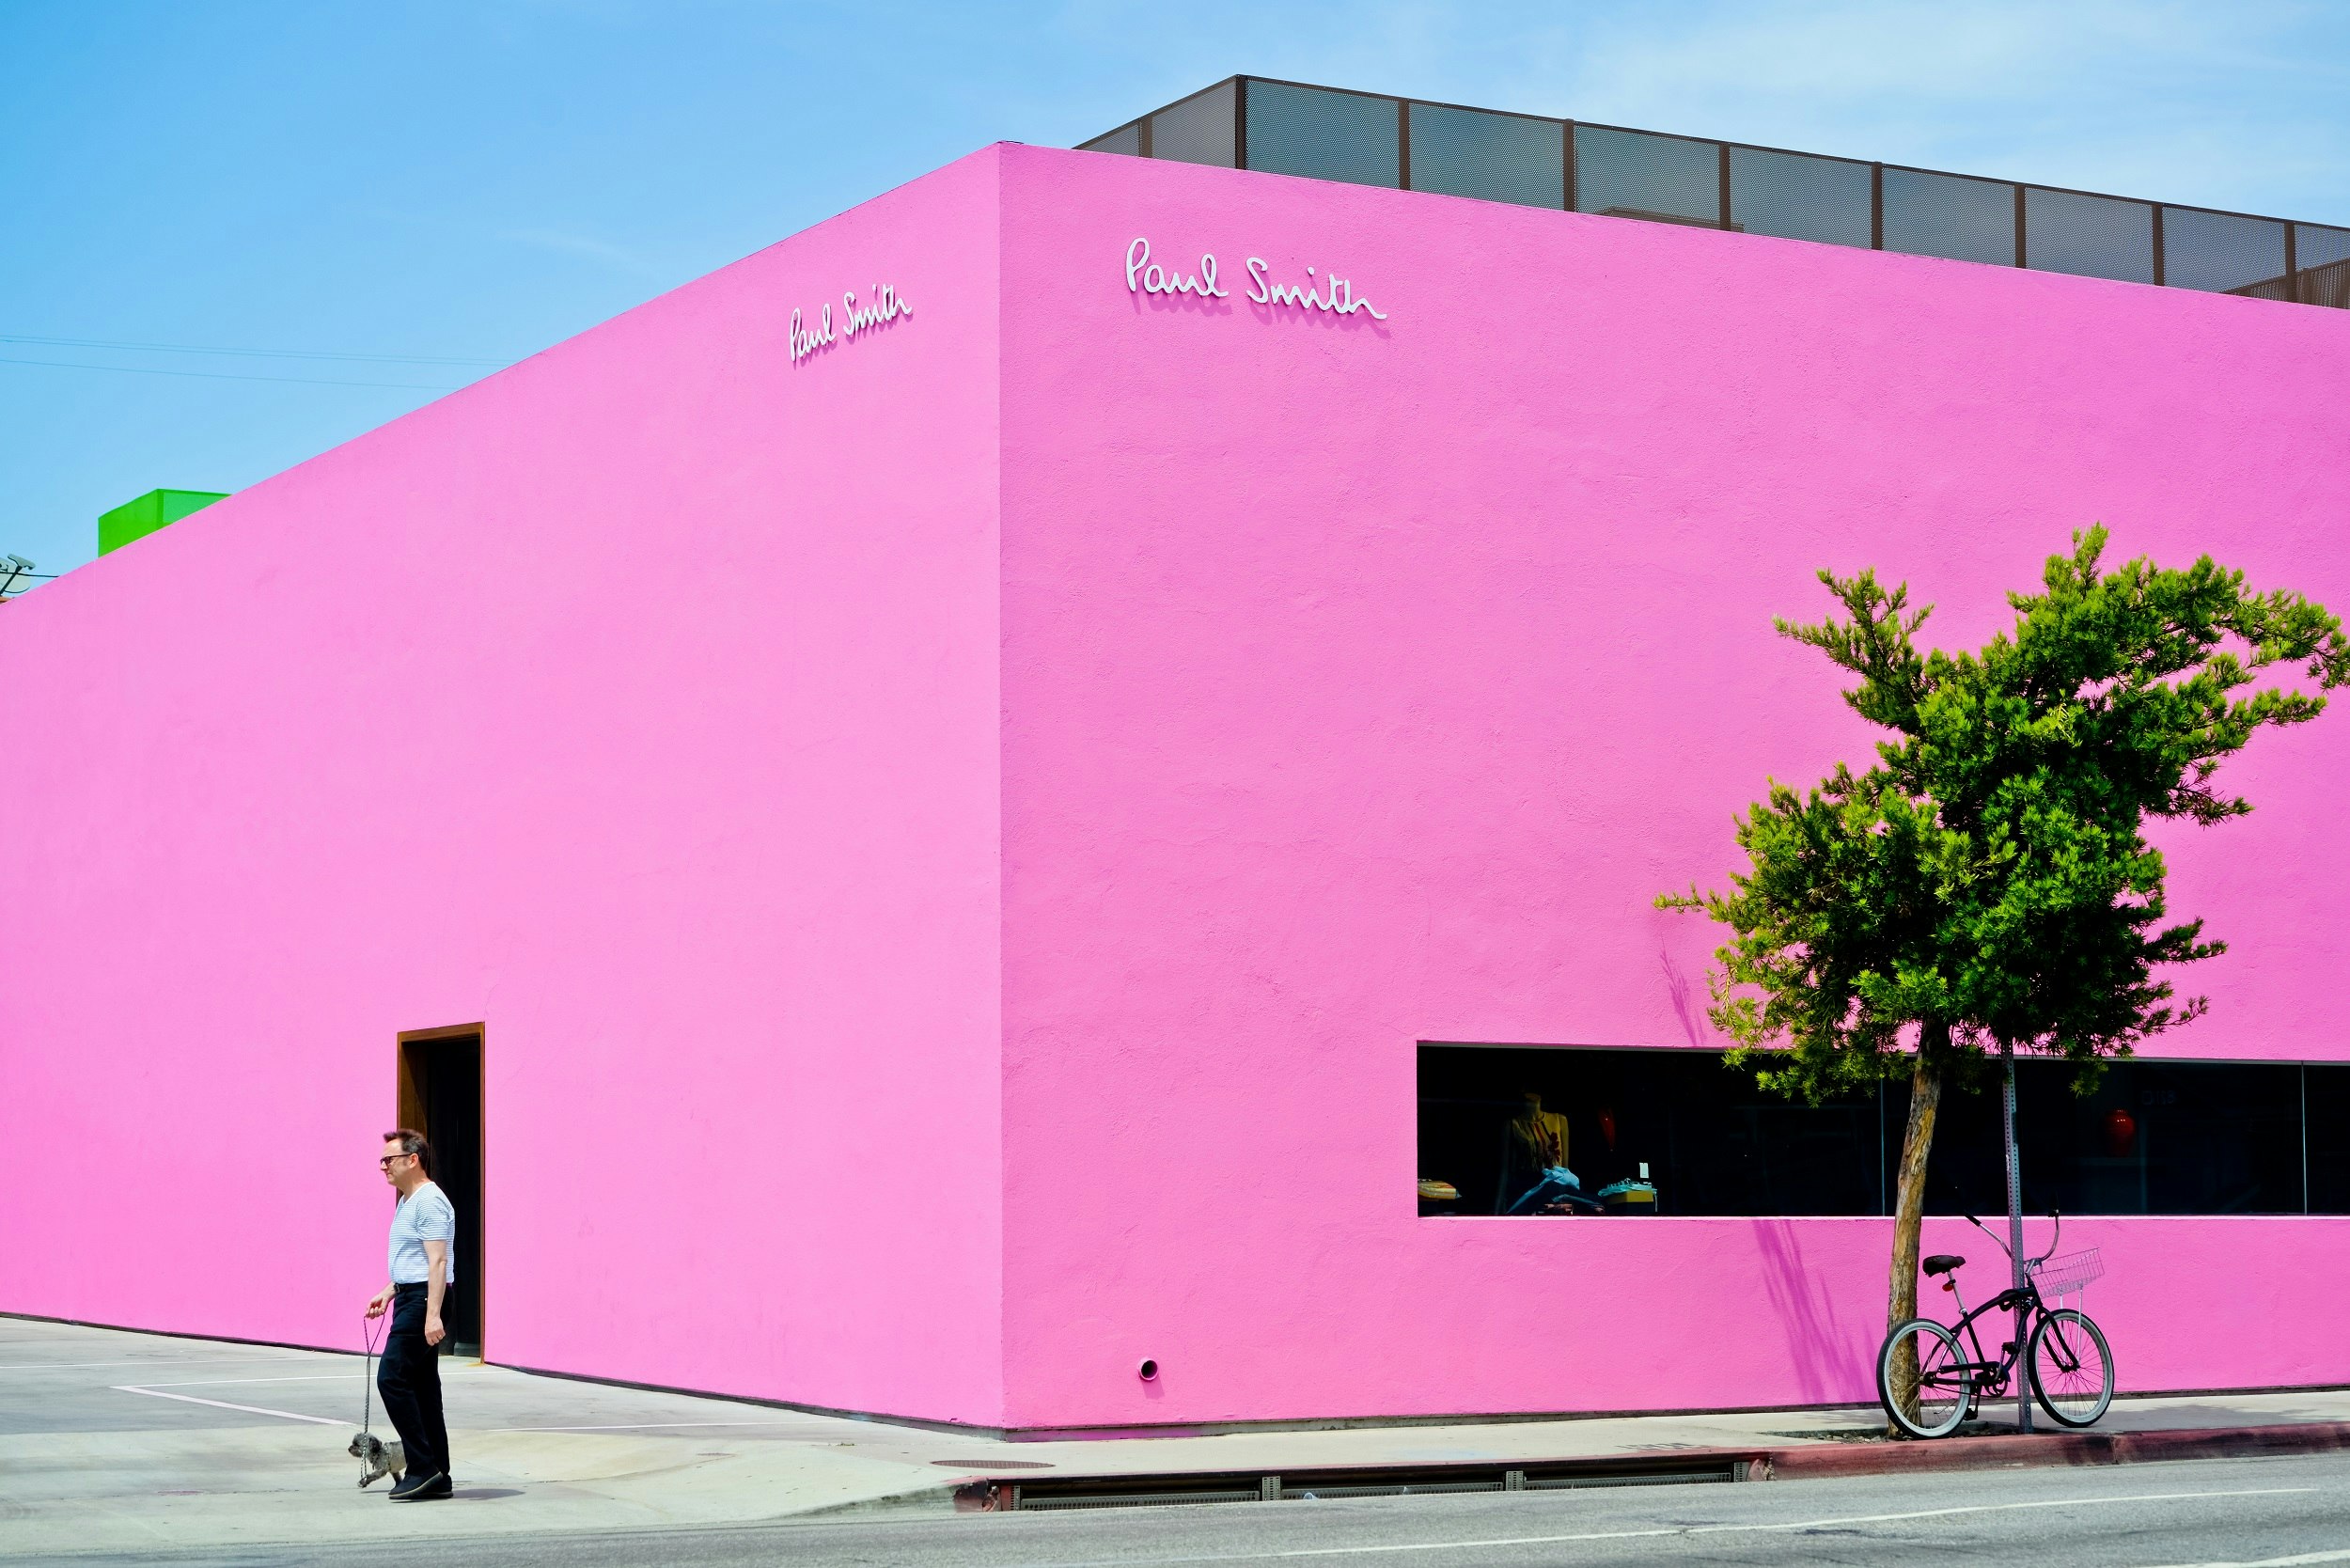 A building on the corner of a street has bright pink walls. A man stands nearby with a small dog on a lead